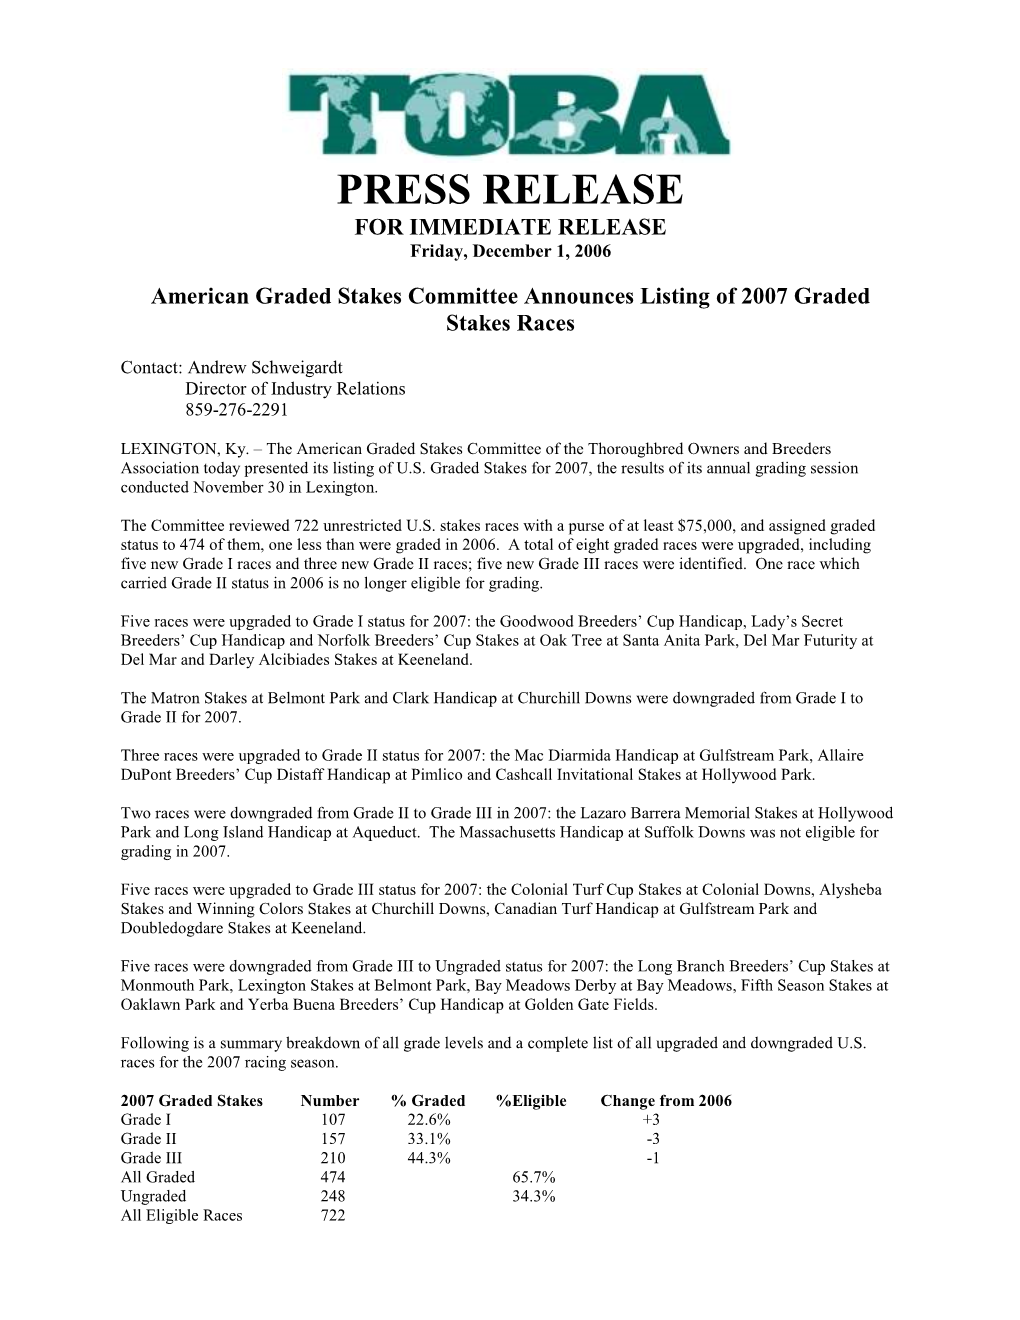 PRESS RELEASE for IMMEDIATE RELEASE Friday, December 1, 2006